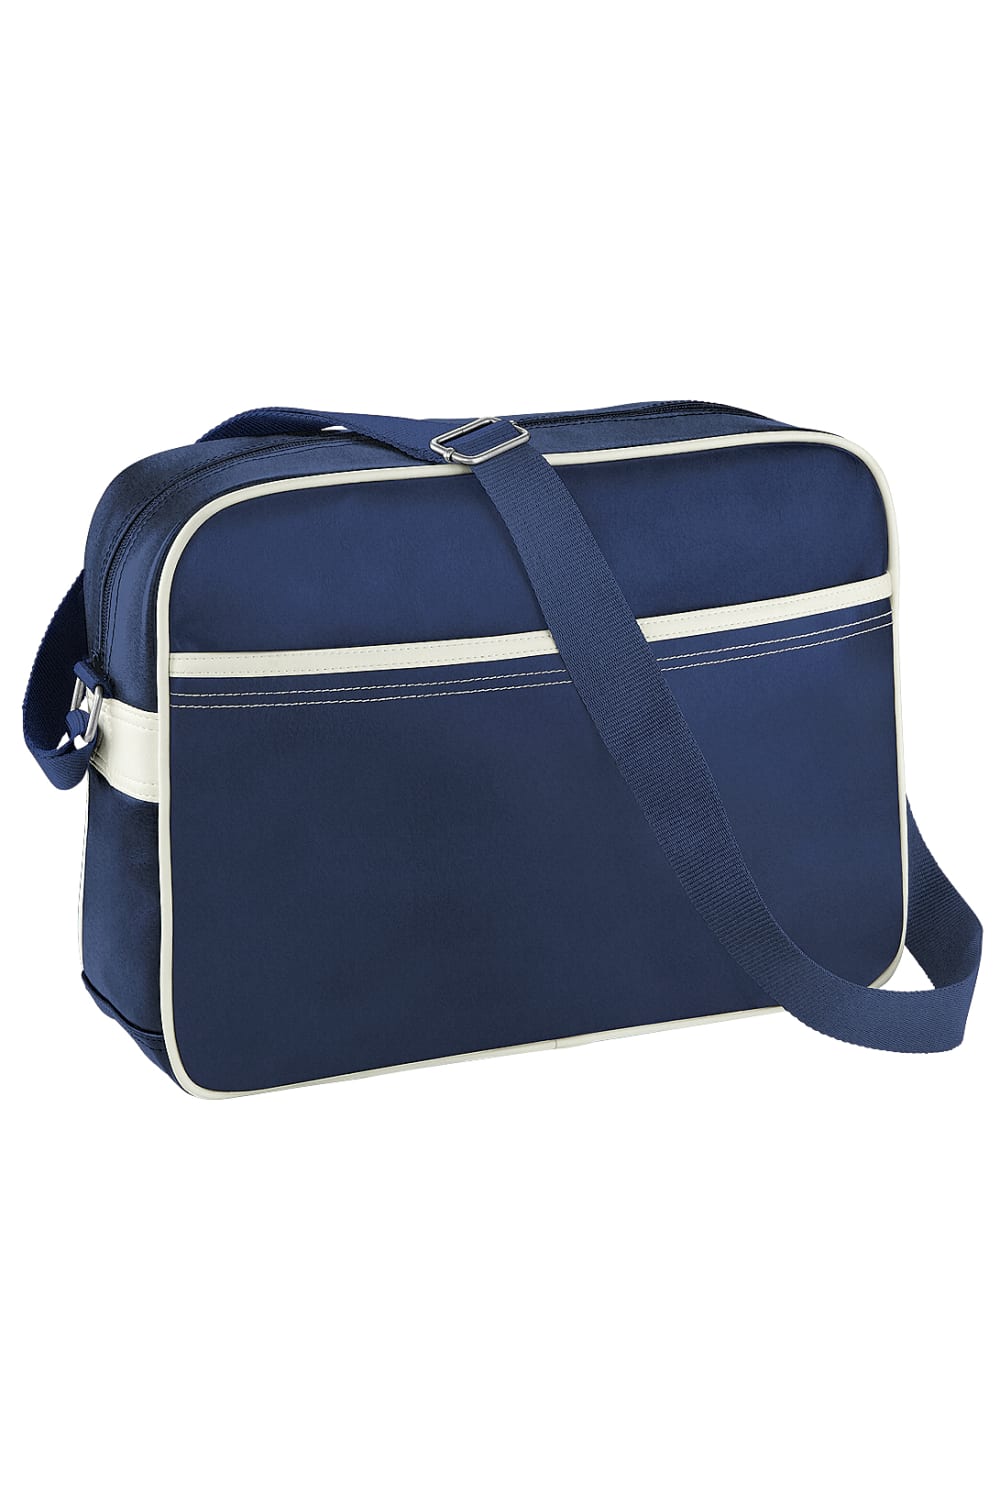 BagBase Original Airline Messenger Bag (12 Liters) (Pack of 2) (French Navy/ Off White) (One Size)